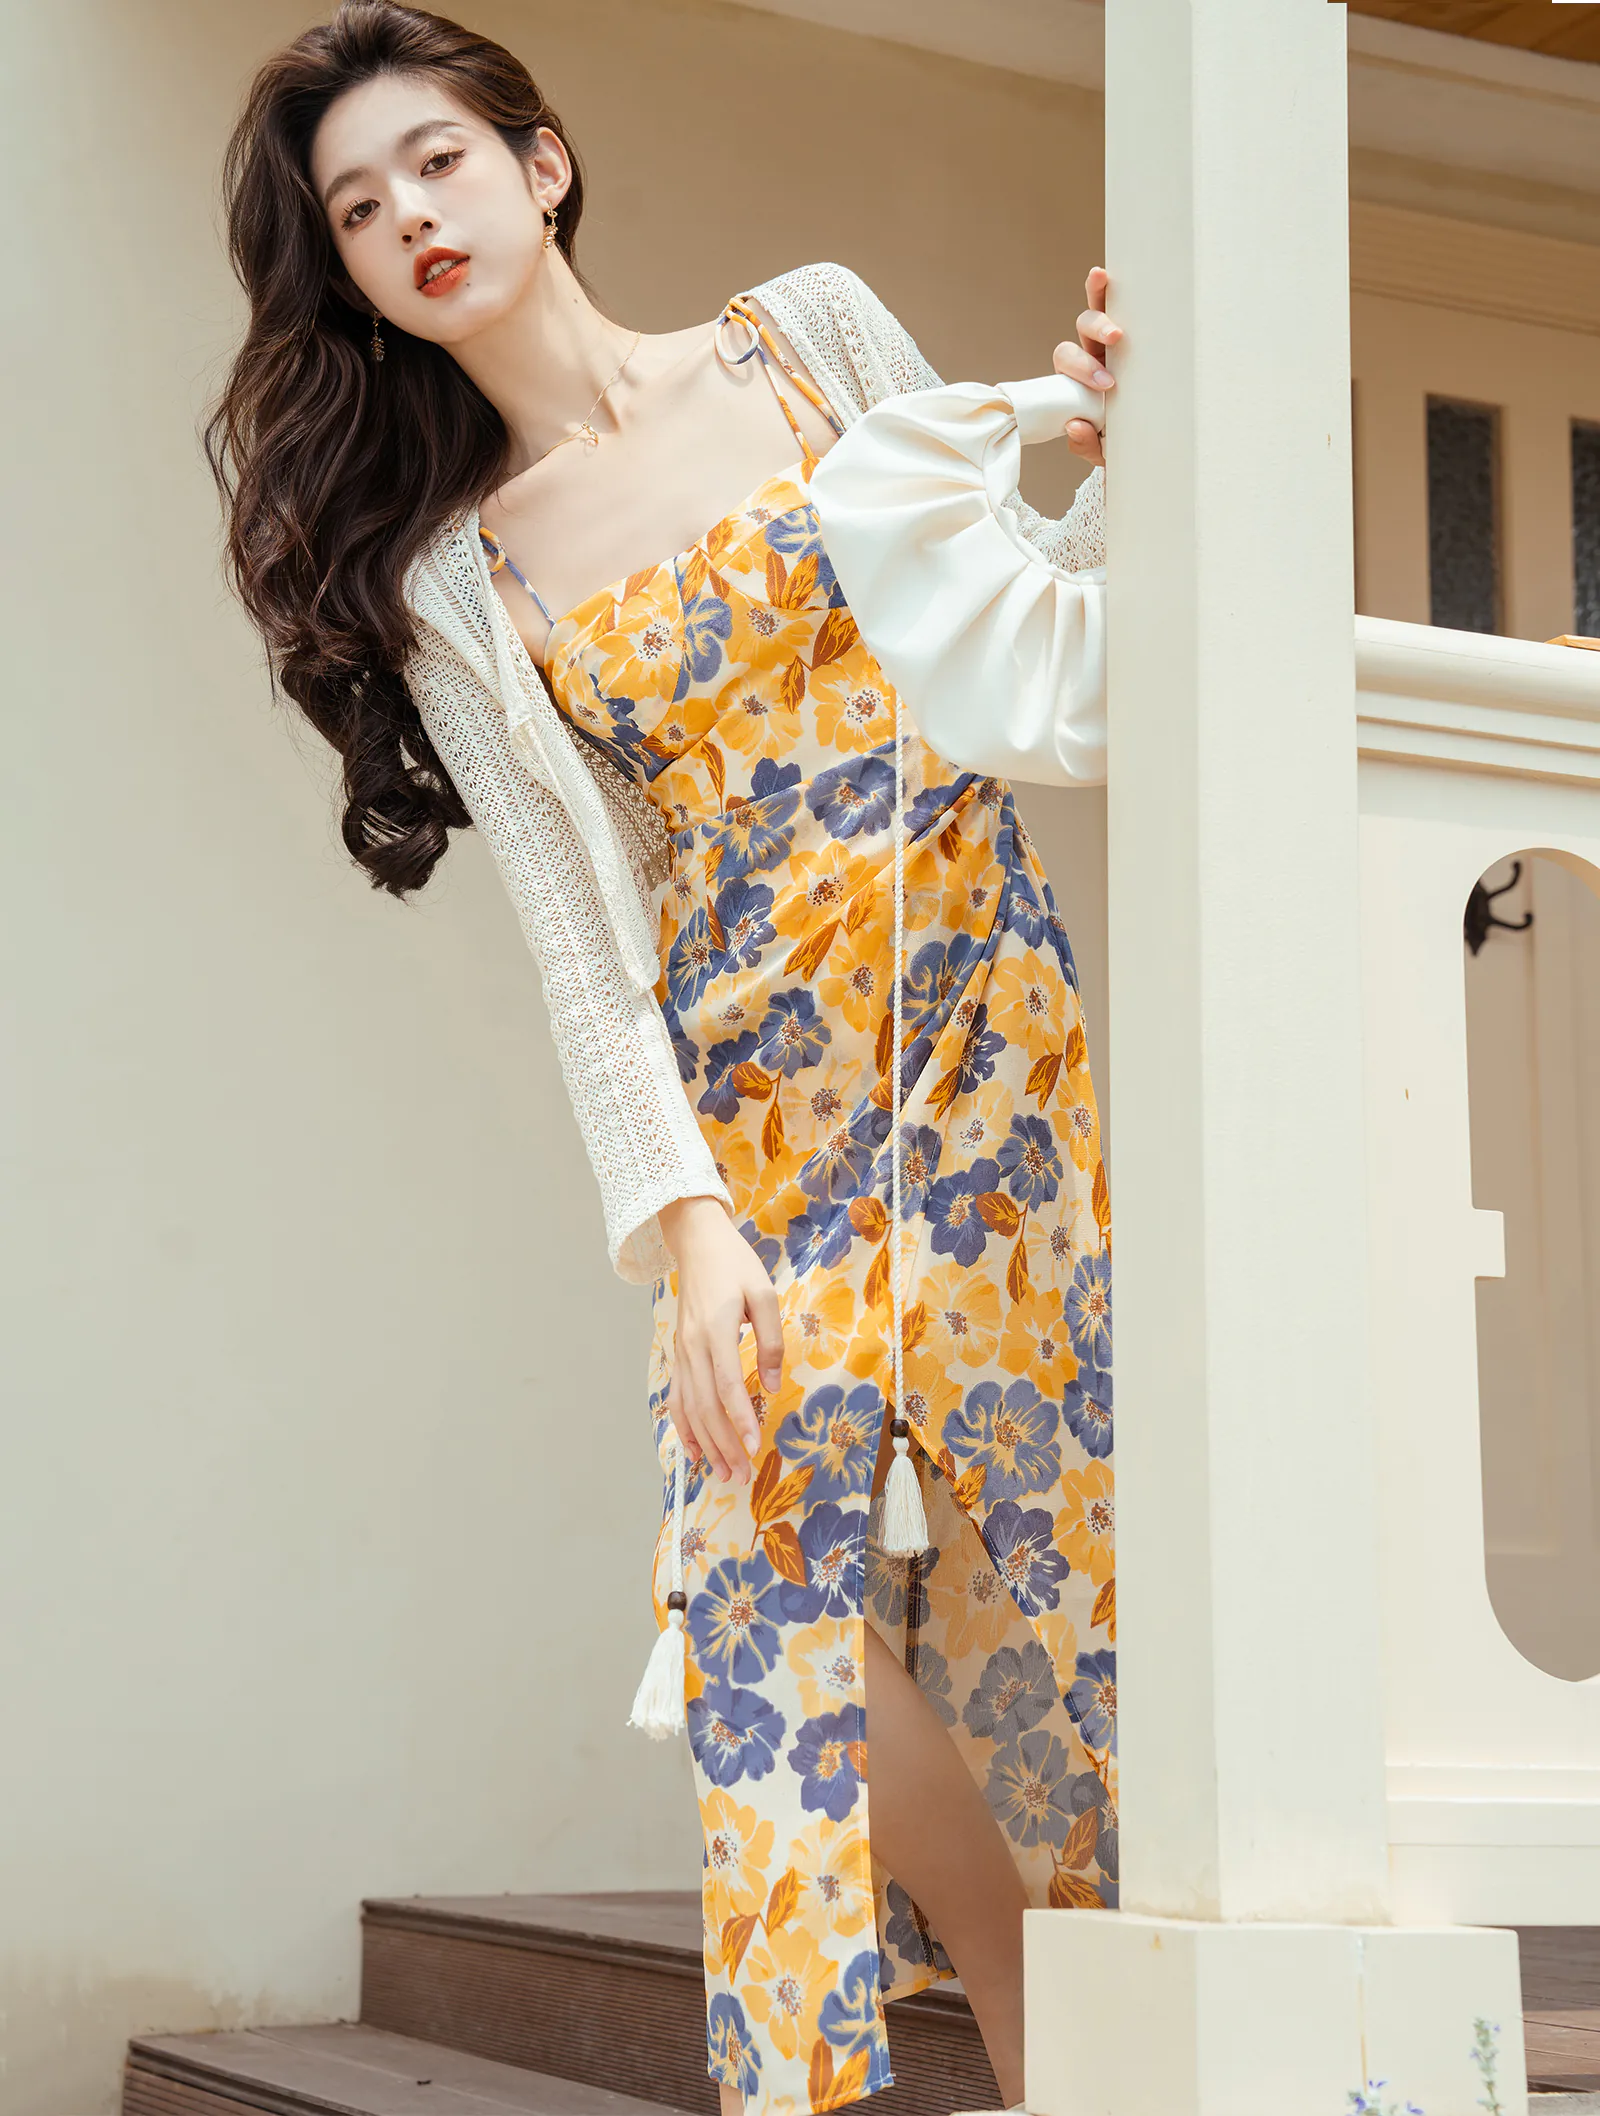 Sweet Floral Printed Yellow Summer Beach Slip Dress with Knit Cardigan01